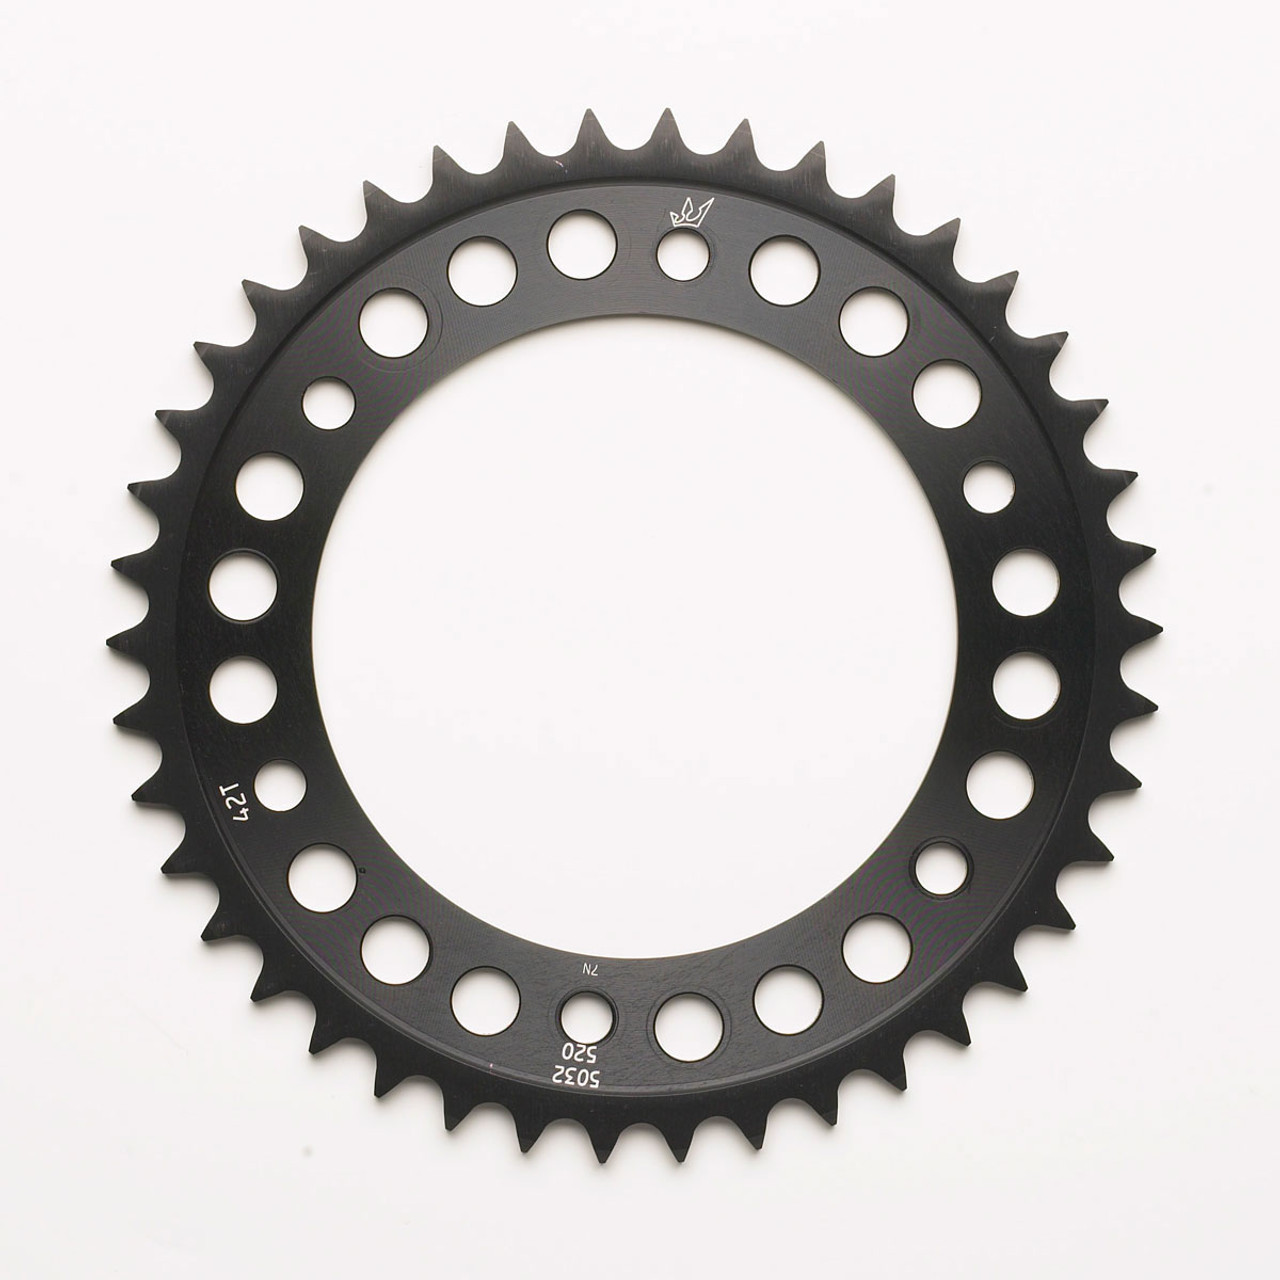 Driven Colored 525 Rear Sprocket for ZX7R 96-03 | Sprockets 